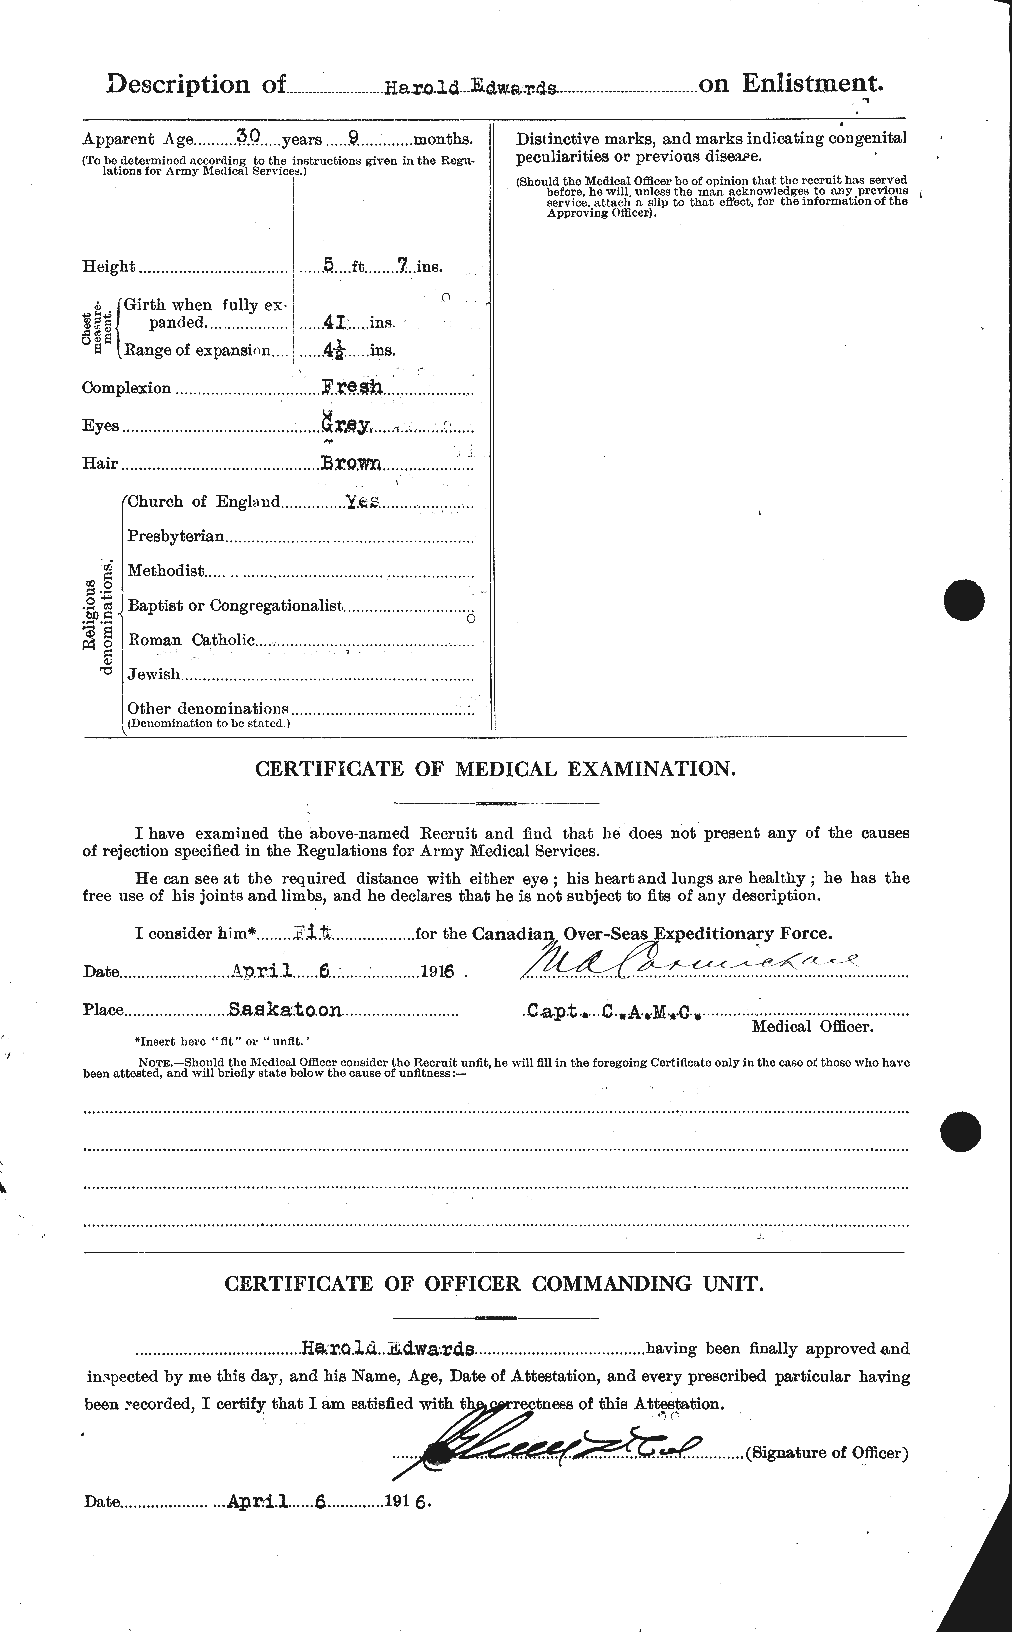 Personnel Records of the First World War - CEF 309713b